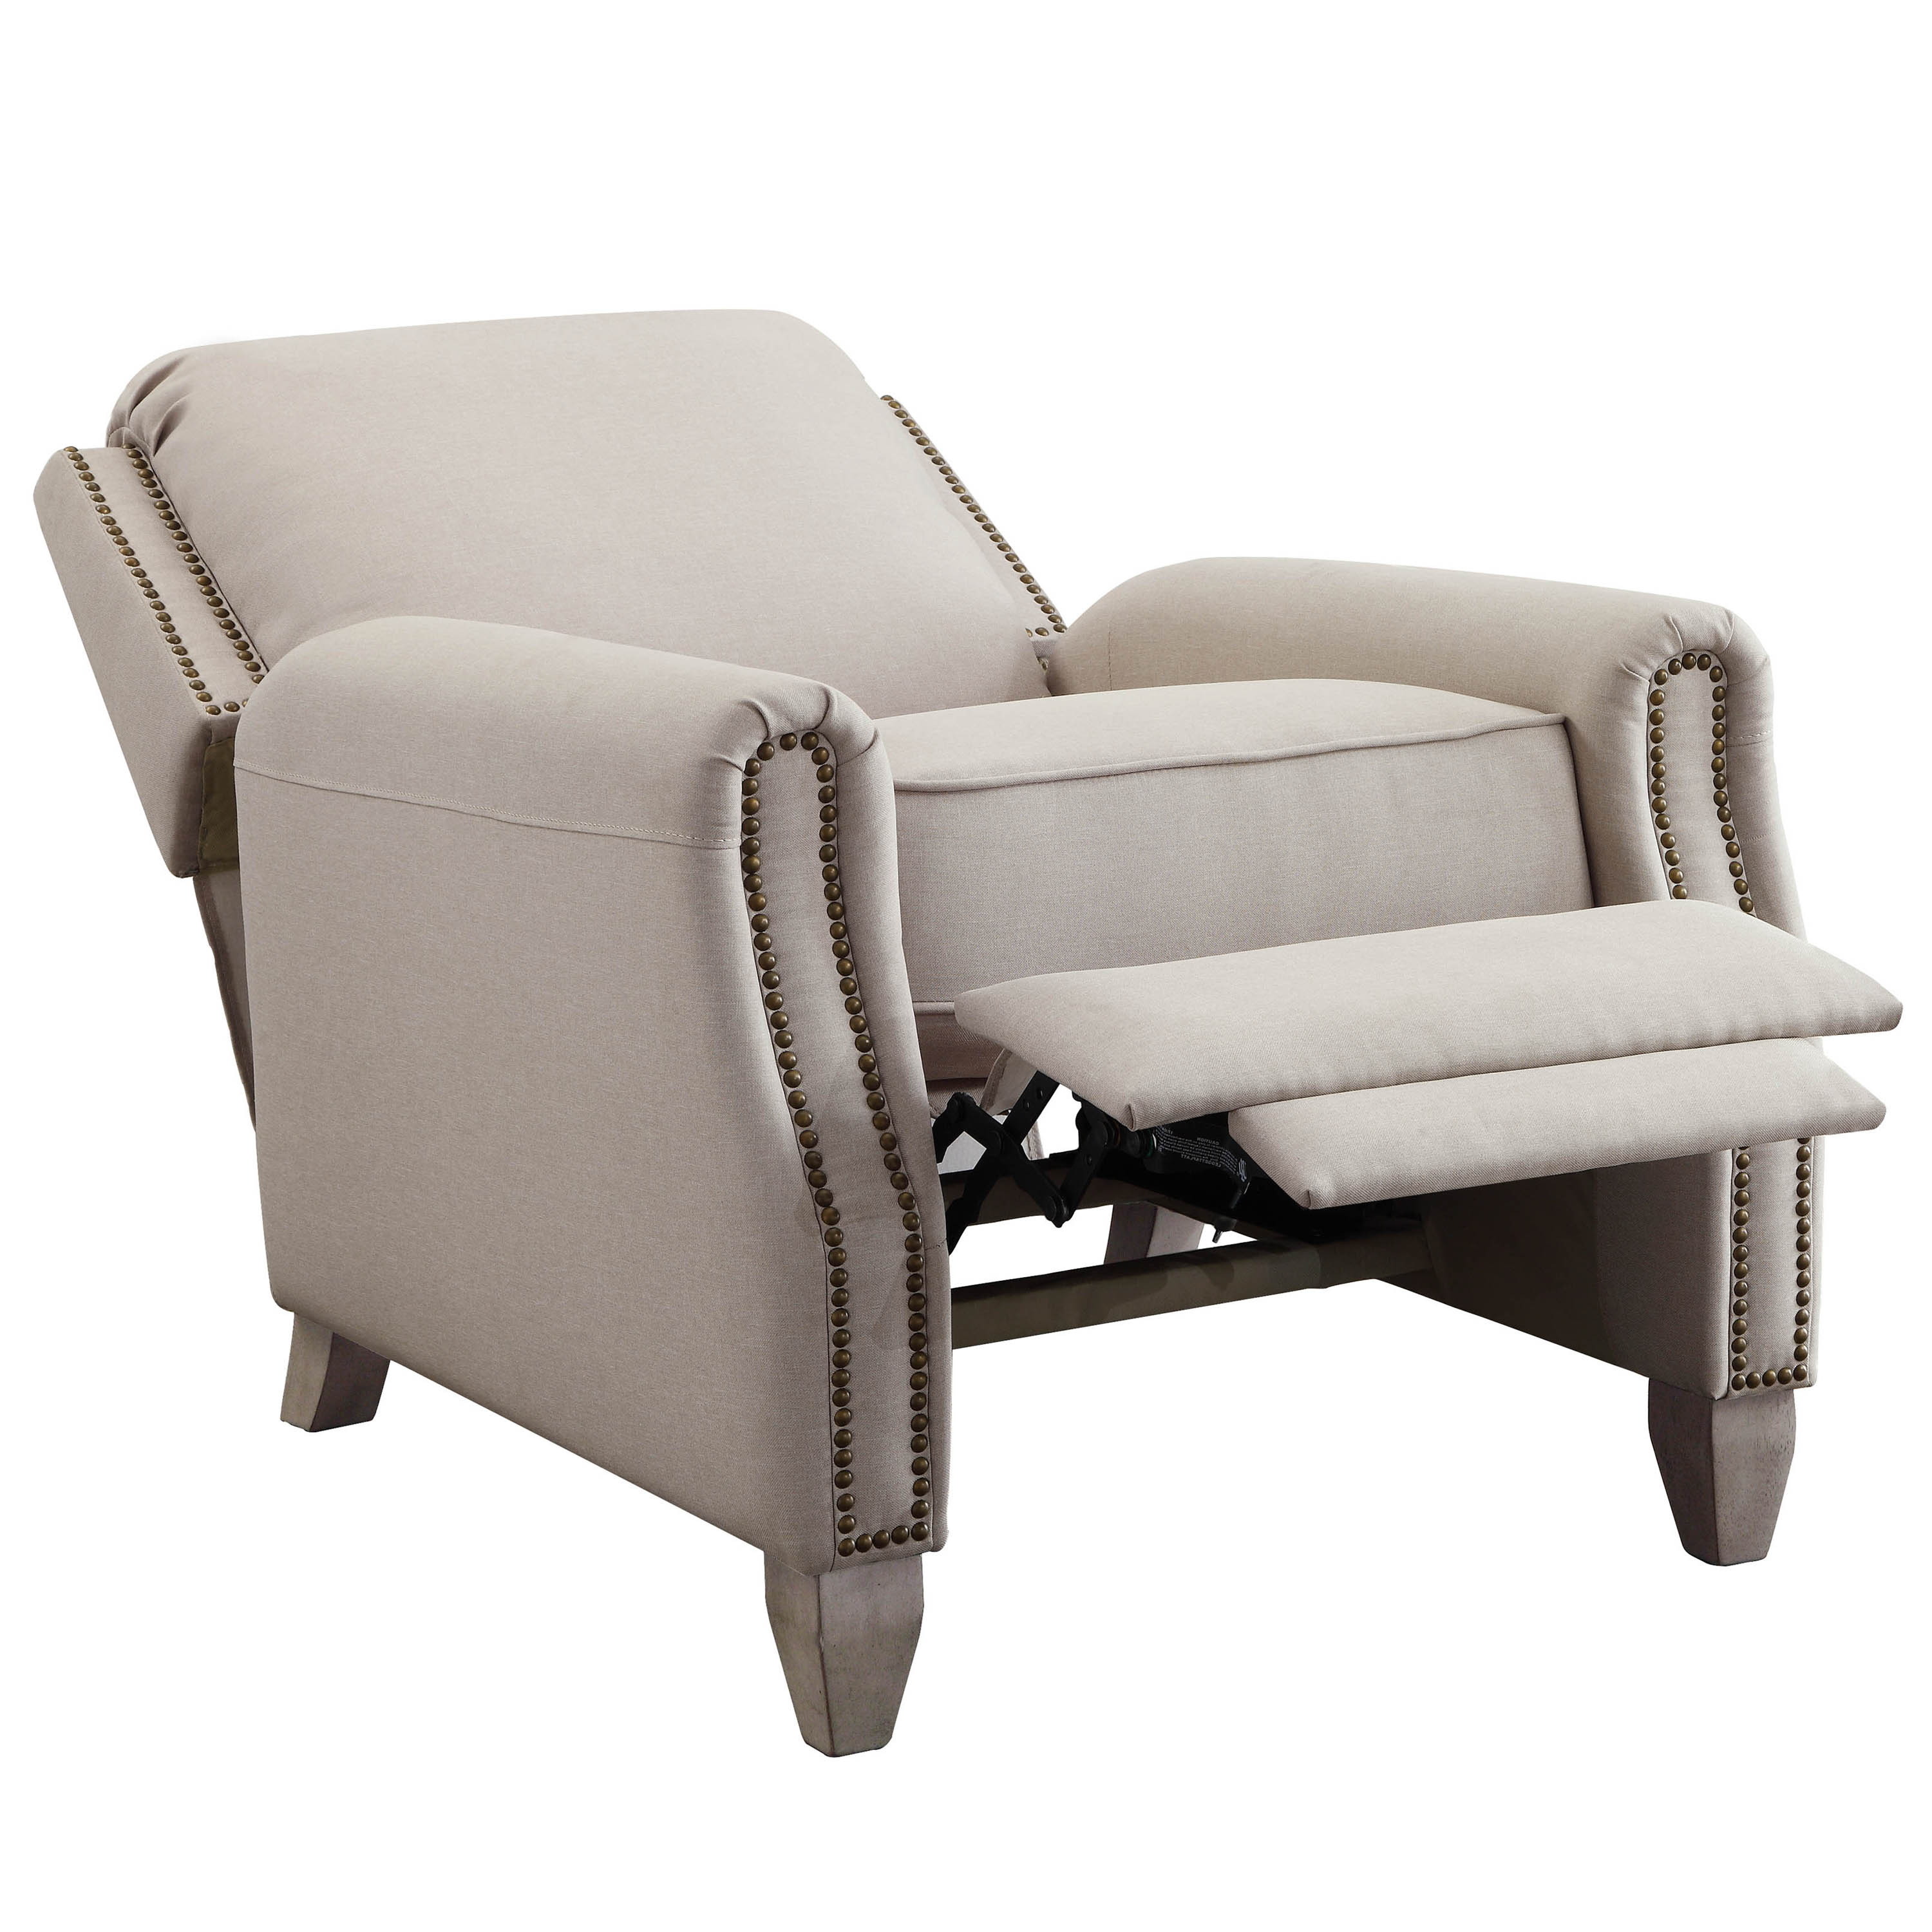 Better Homes and Gardens Pushback Recliner, Taupe Fabric Upholstery - image 6 of 7